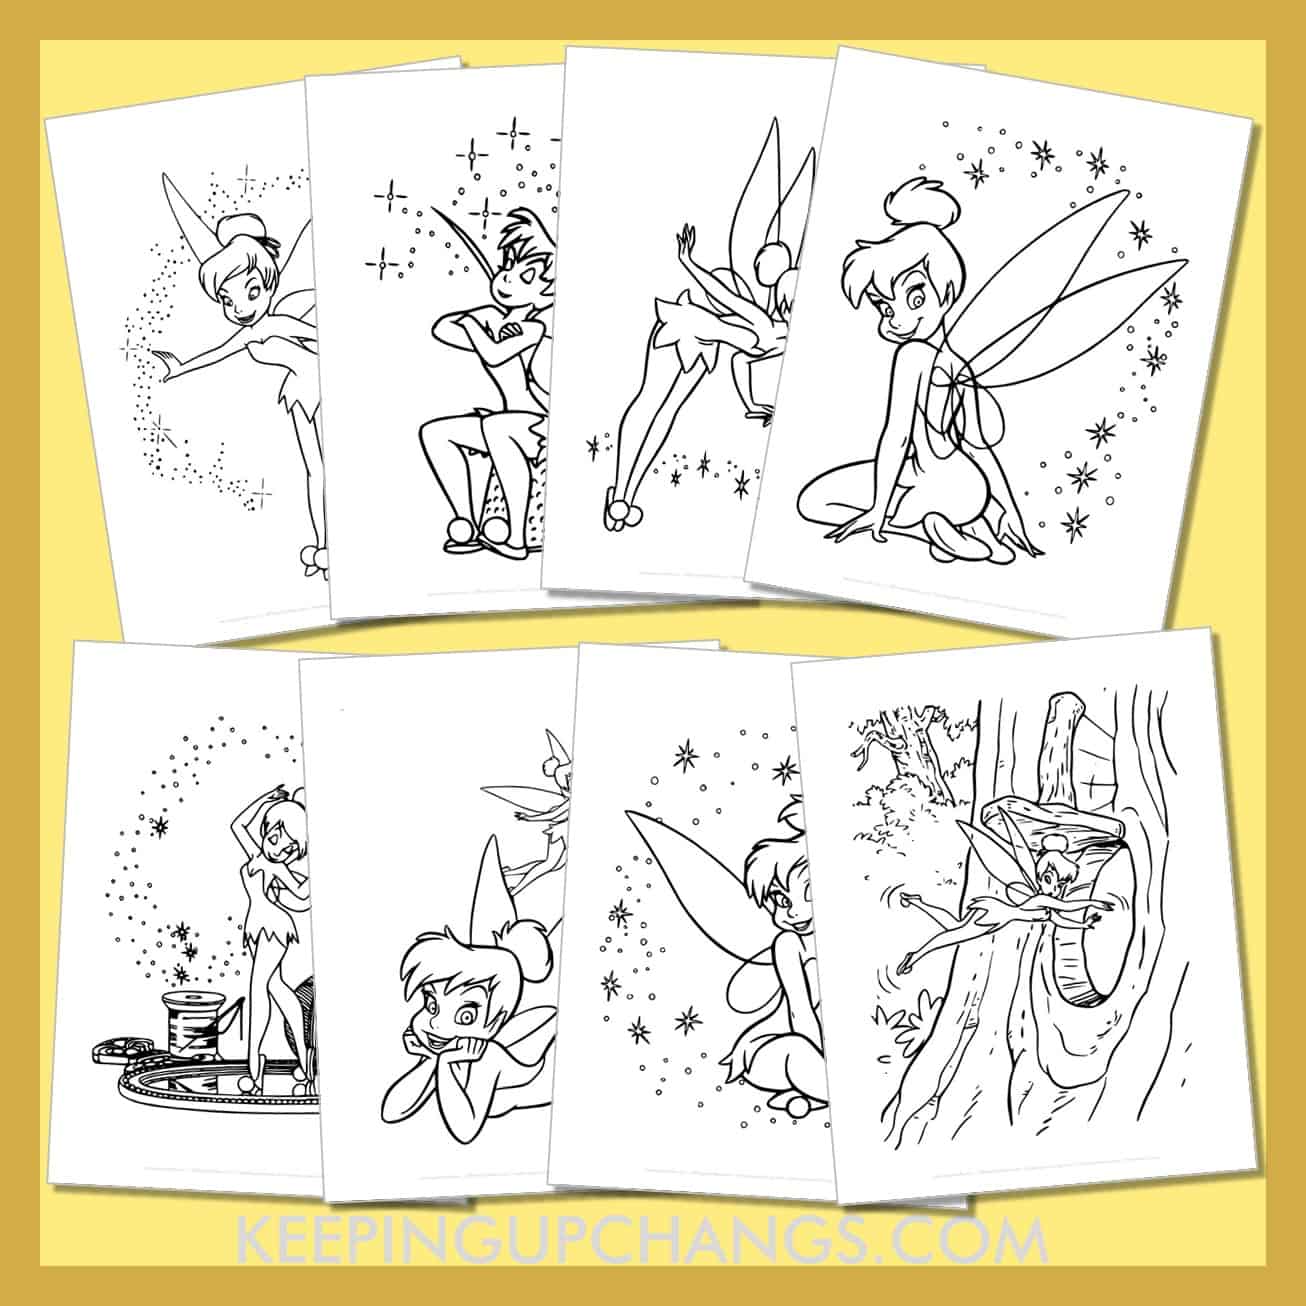 free tinkerbell pictures to color for toddlers, kids, adults.